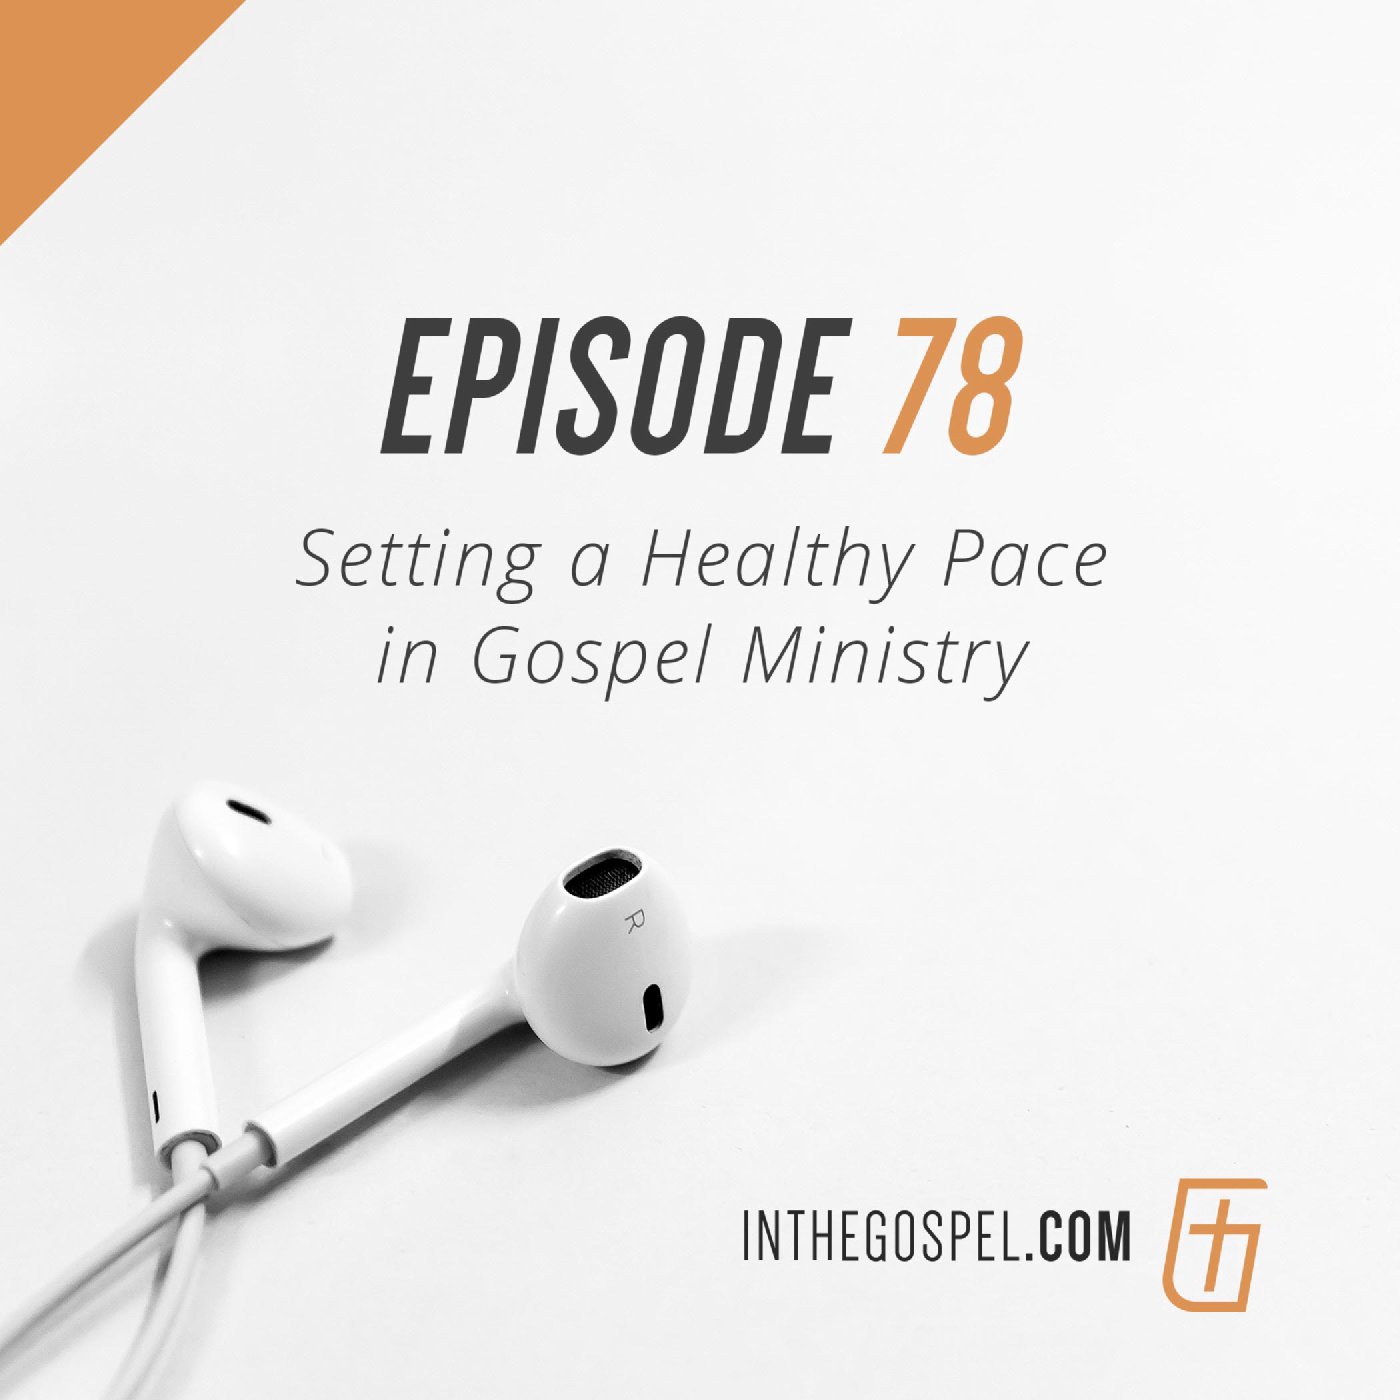 Episode 78: Setting a Healthy Pace in Gospel Ministry with Mike Lester